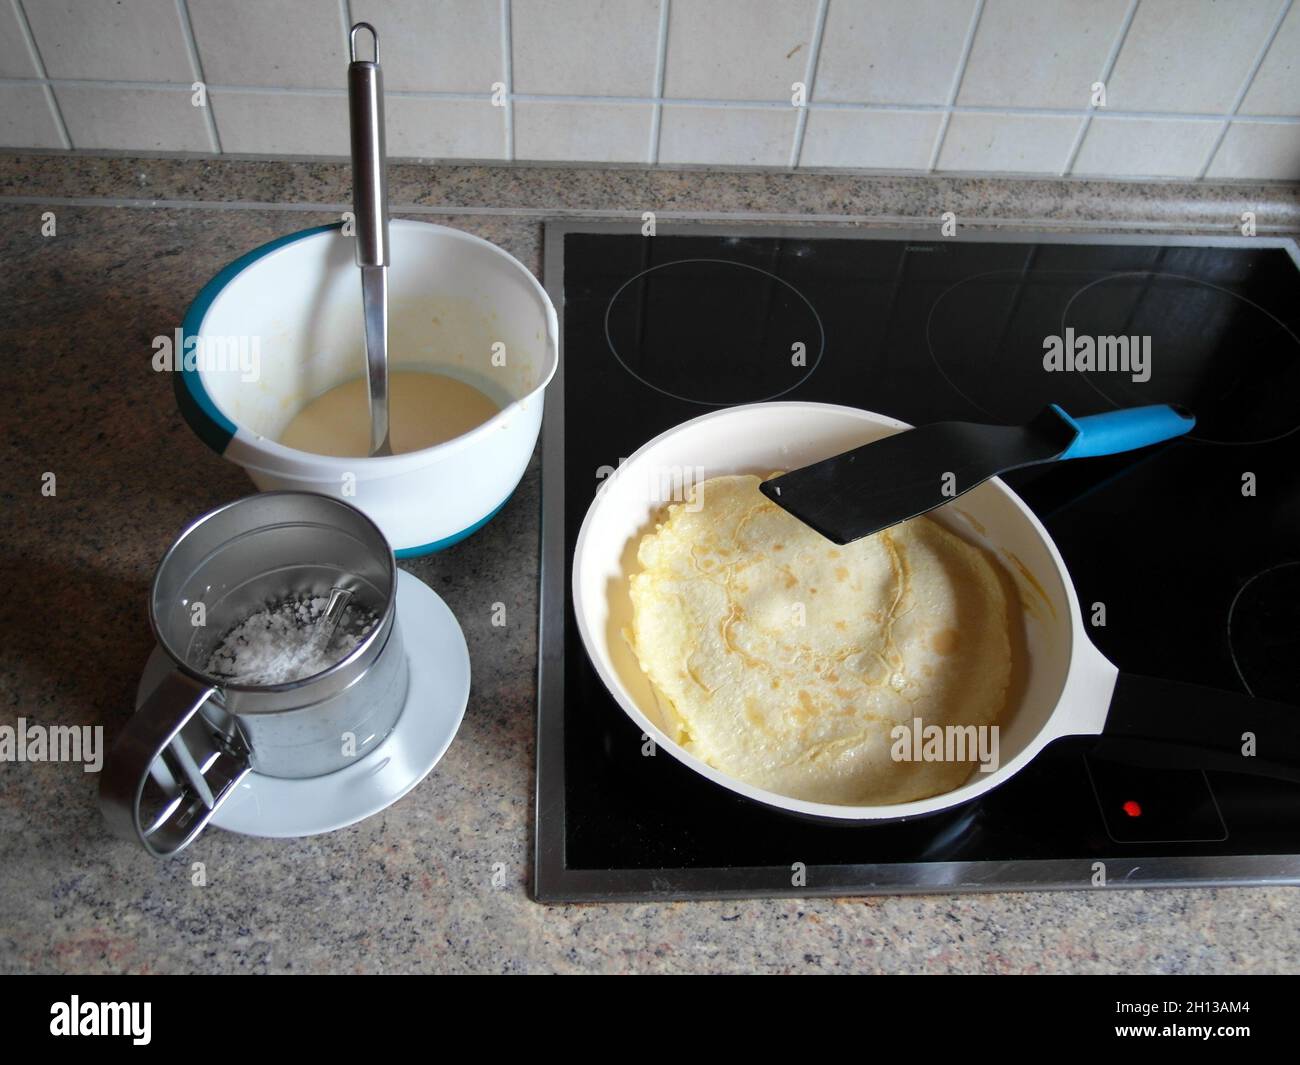 In the kitchen: bowl of batter and pan with pancakes on the stove and sugar shaker Stock Photo